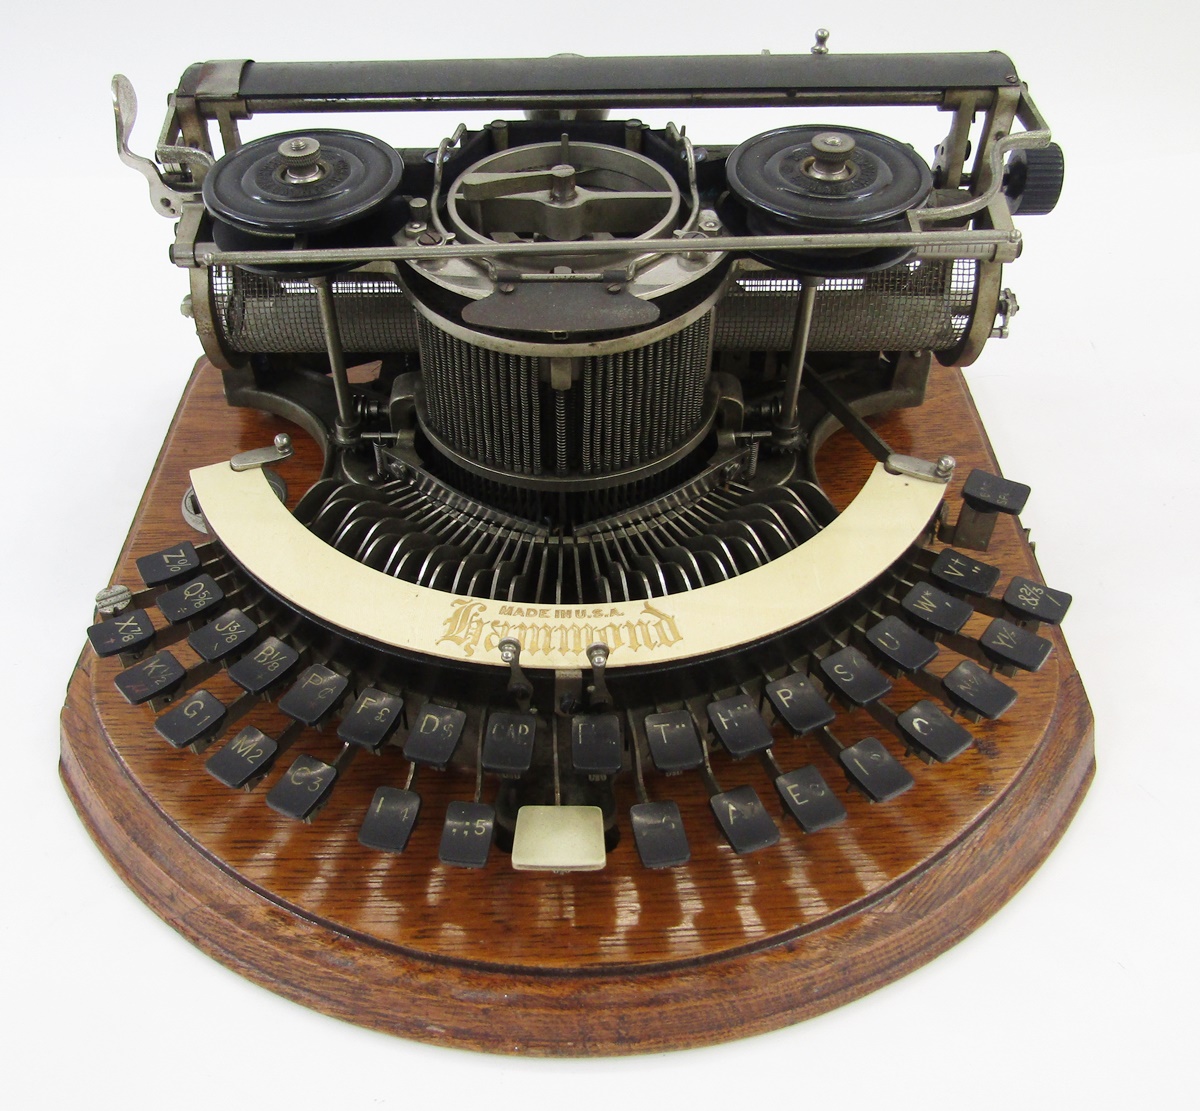 Victorian 'The Hammond' typewriter, circa 1880's, made in New York, USA, housed in a fitted oak case - Image 15 of 21